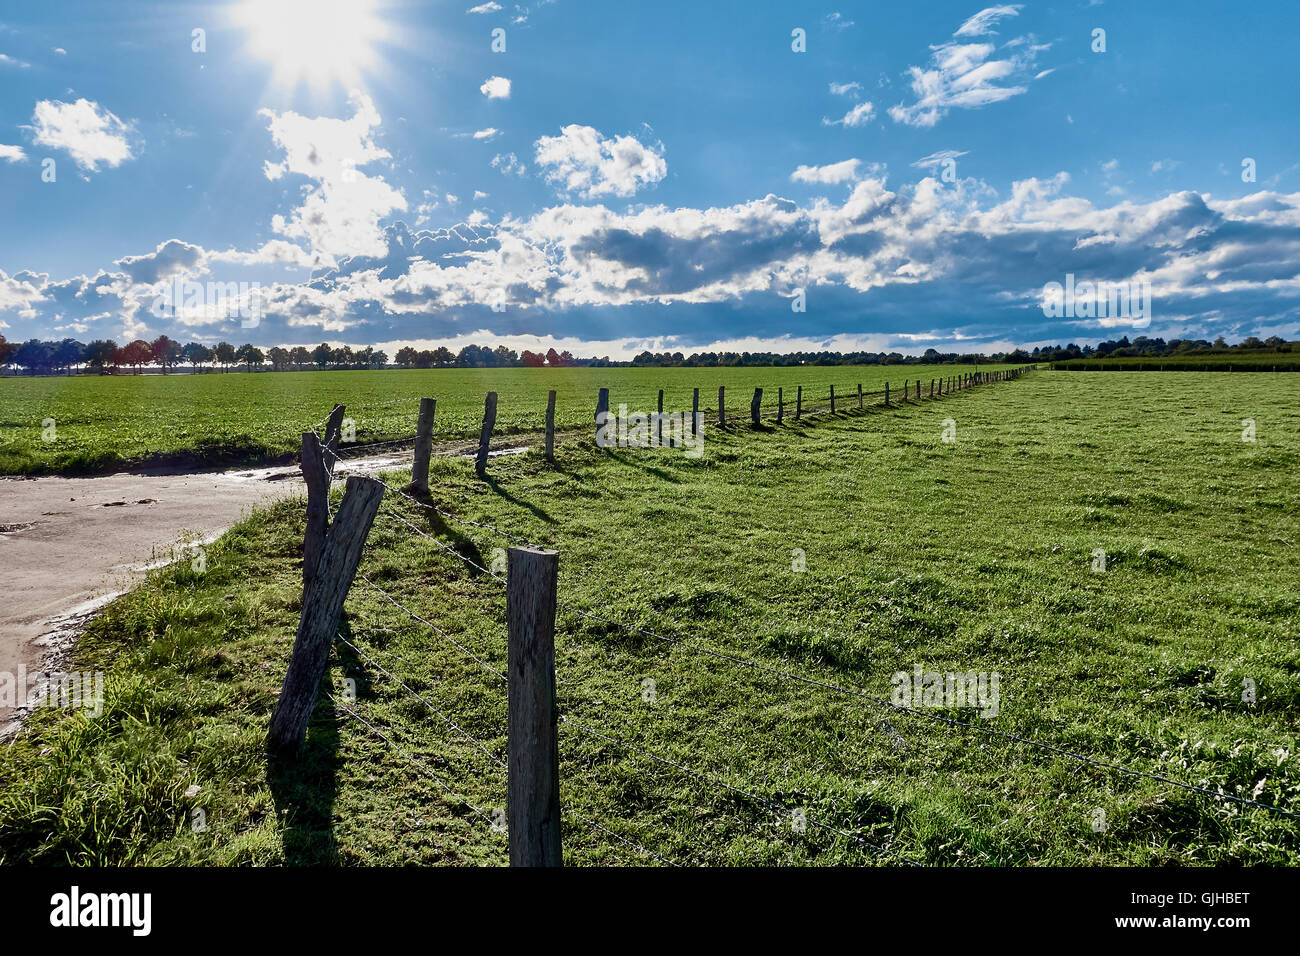 Fenced pastures right after a thunderstorm, with the sun breaking through in rural area, creating strong sun beams Stock Photo